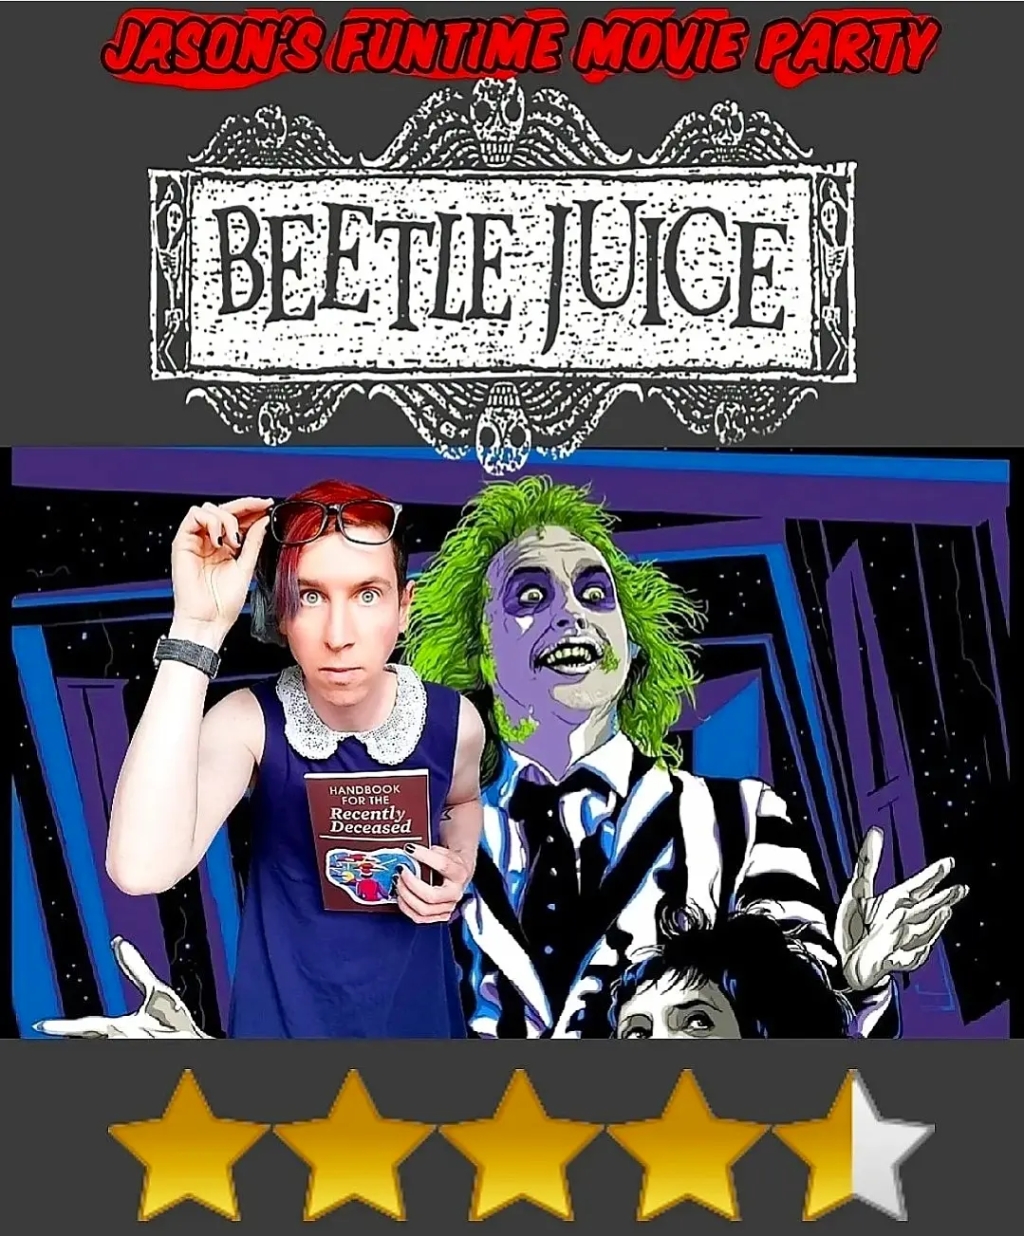 A Short Review Of Beetlejuice (1988) (originally published March 2022)